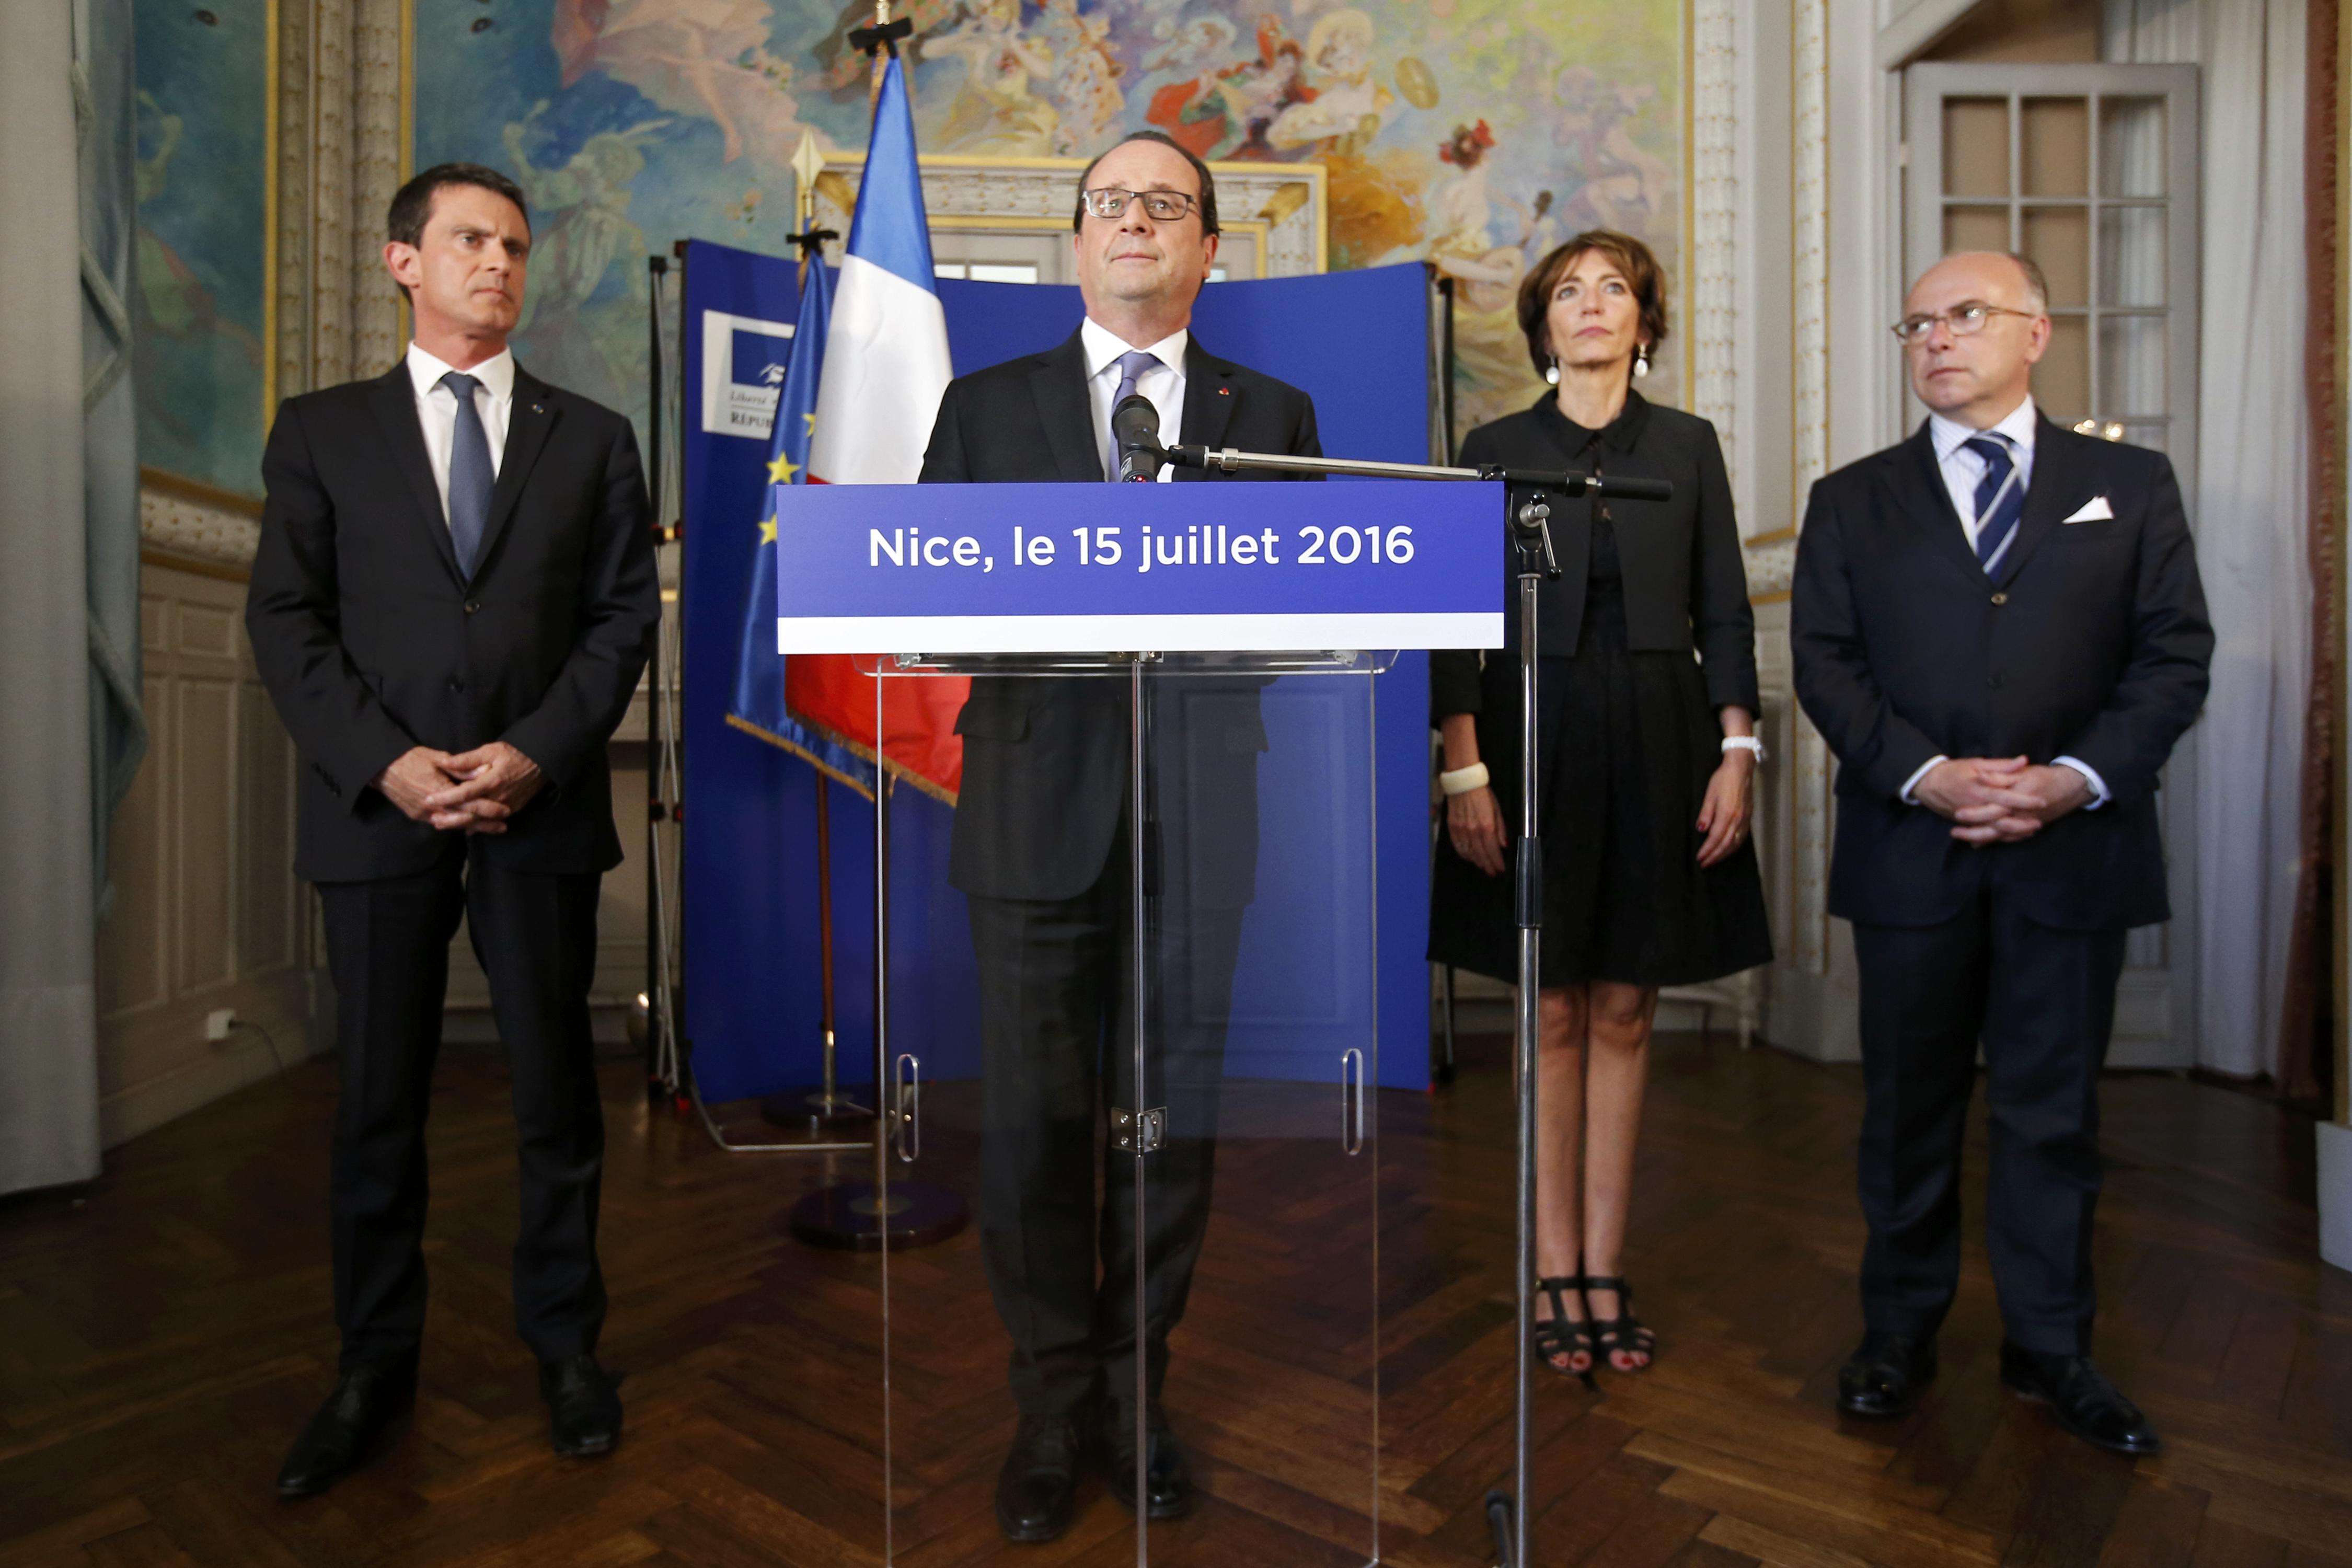 French President Francois Hollande with Prime Minister Manuel Valls (left), Interior Minister Bernard Cazeneuve (right) and Minister of Health Marisol Touraine as he speaks to journalists at Prefectoral Palace. Photo: Reuters